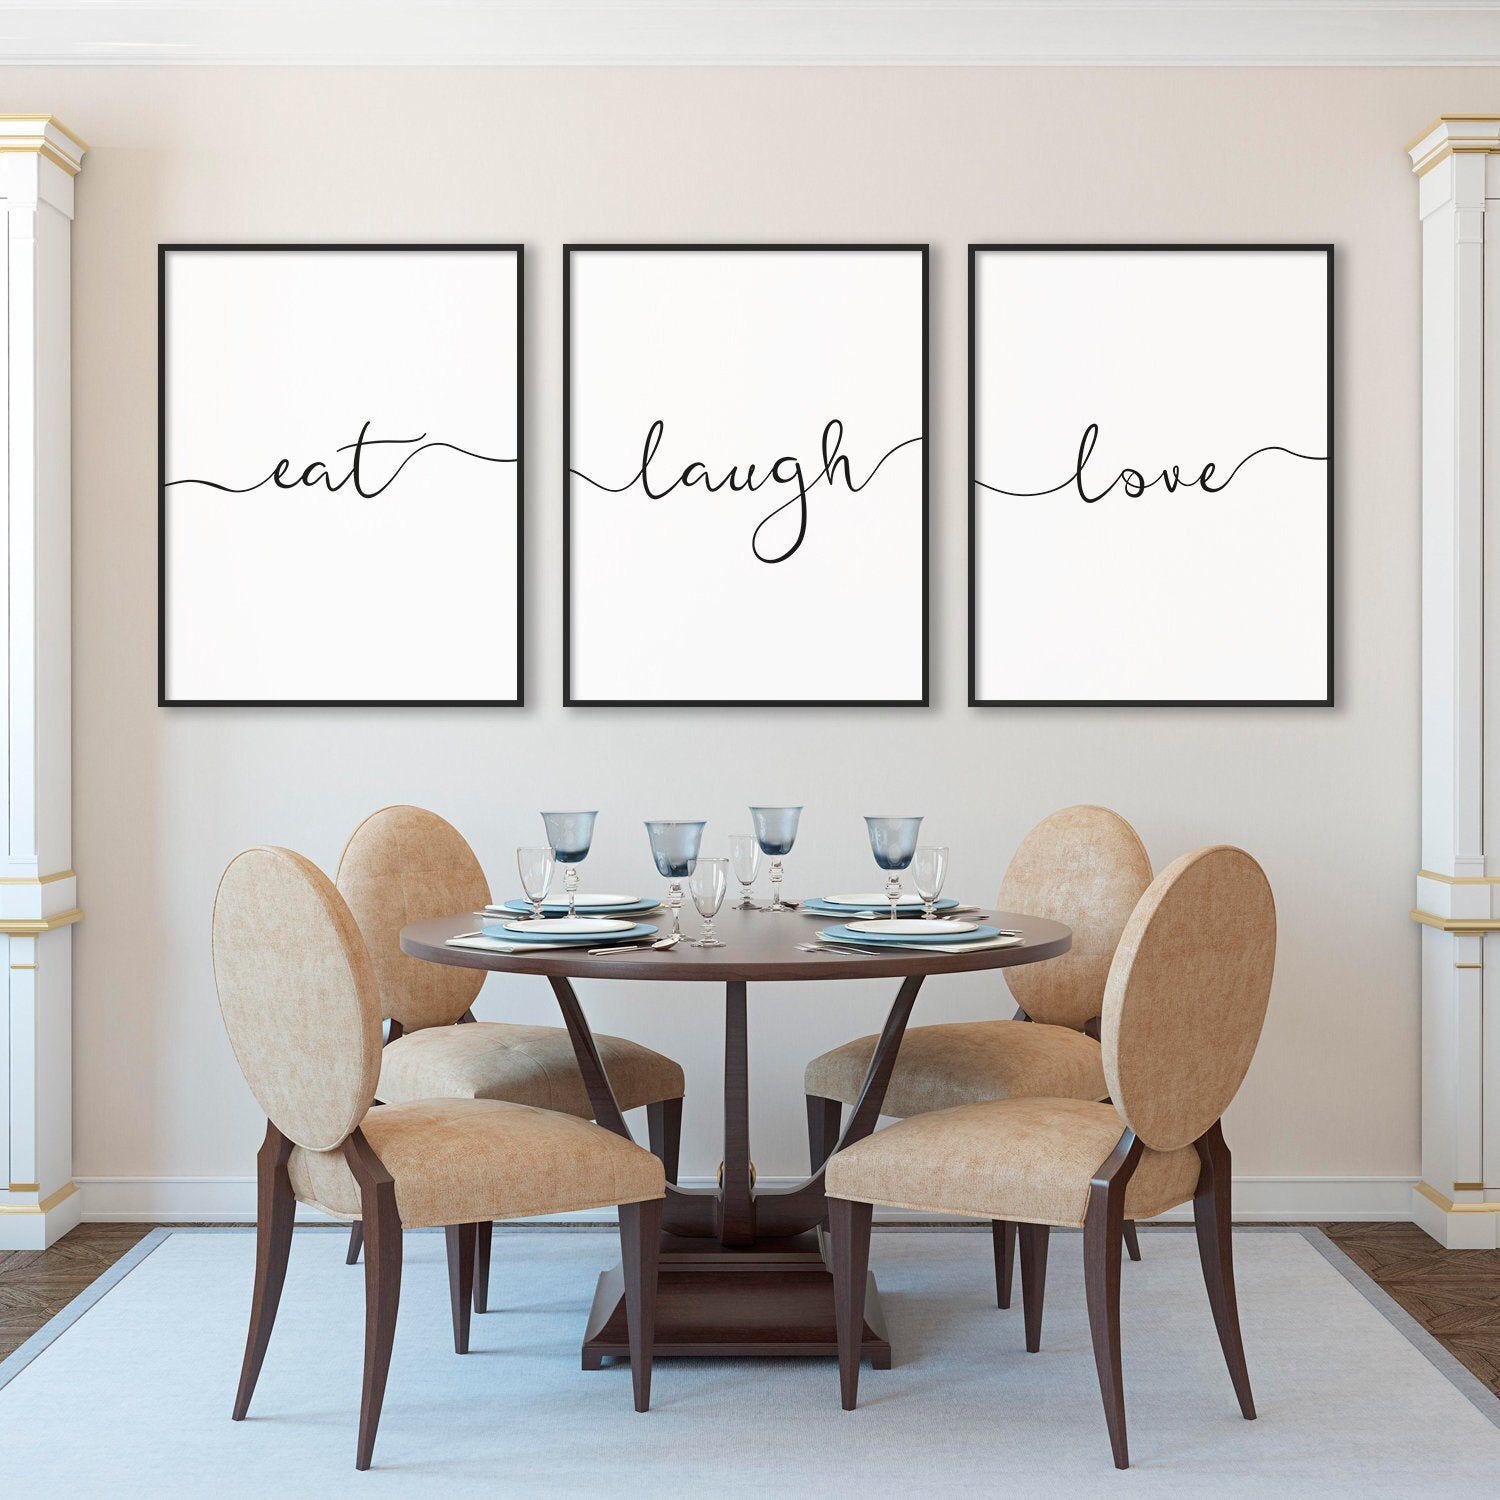 Eat Laugh Love Print Set of Three Calligraphy Prints Home Wall Art Kitchen Decor Dining Room Decor Hostess Gift Poster Decor Printable Art -   18 room decor Art pictures ideas